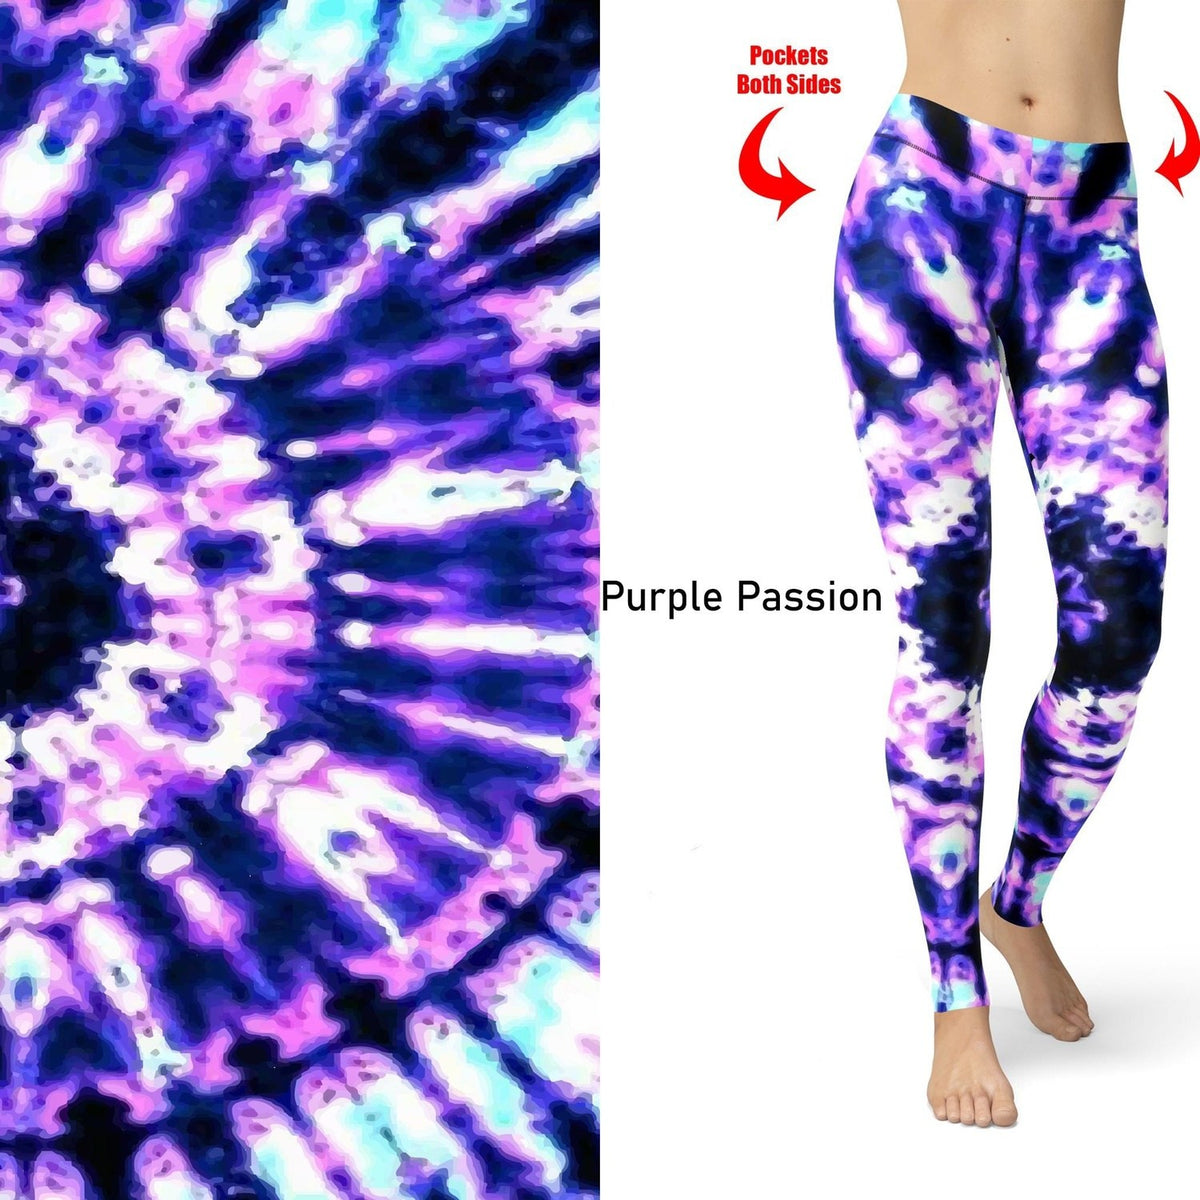 Purple Passion Full Length Leggings with Pockets